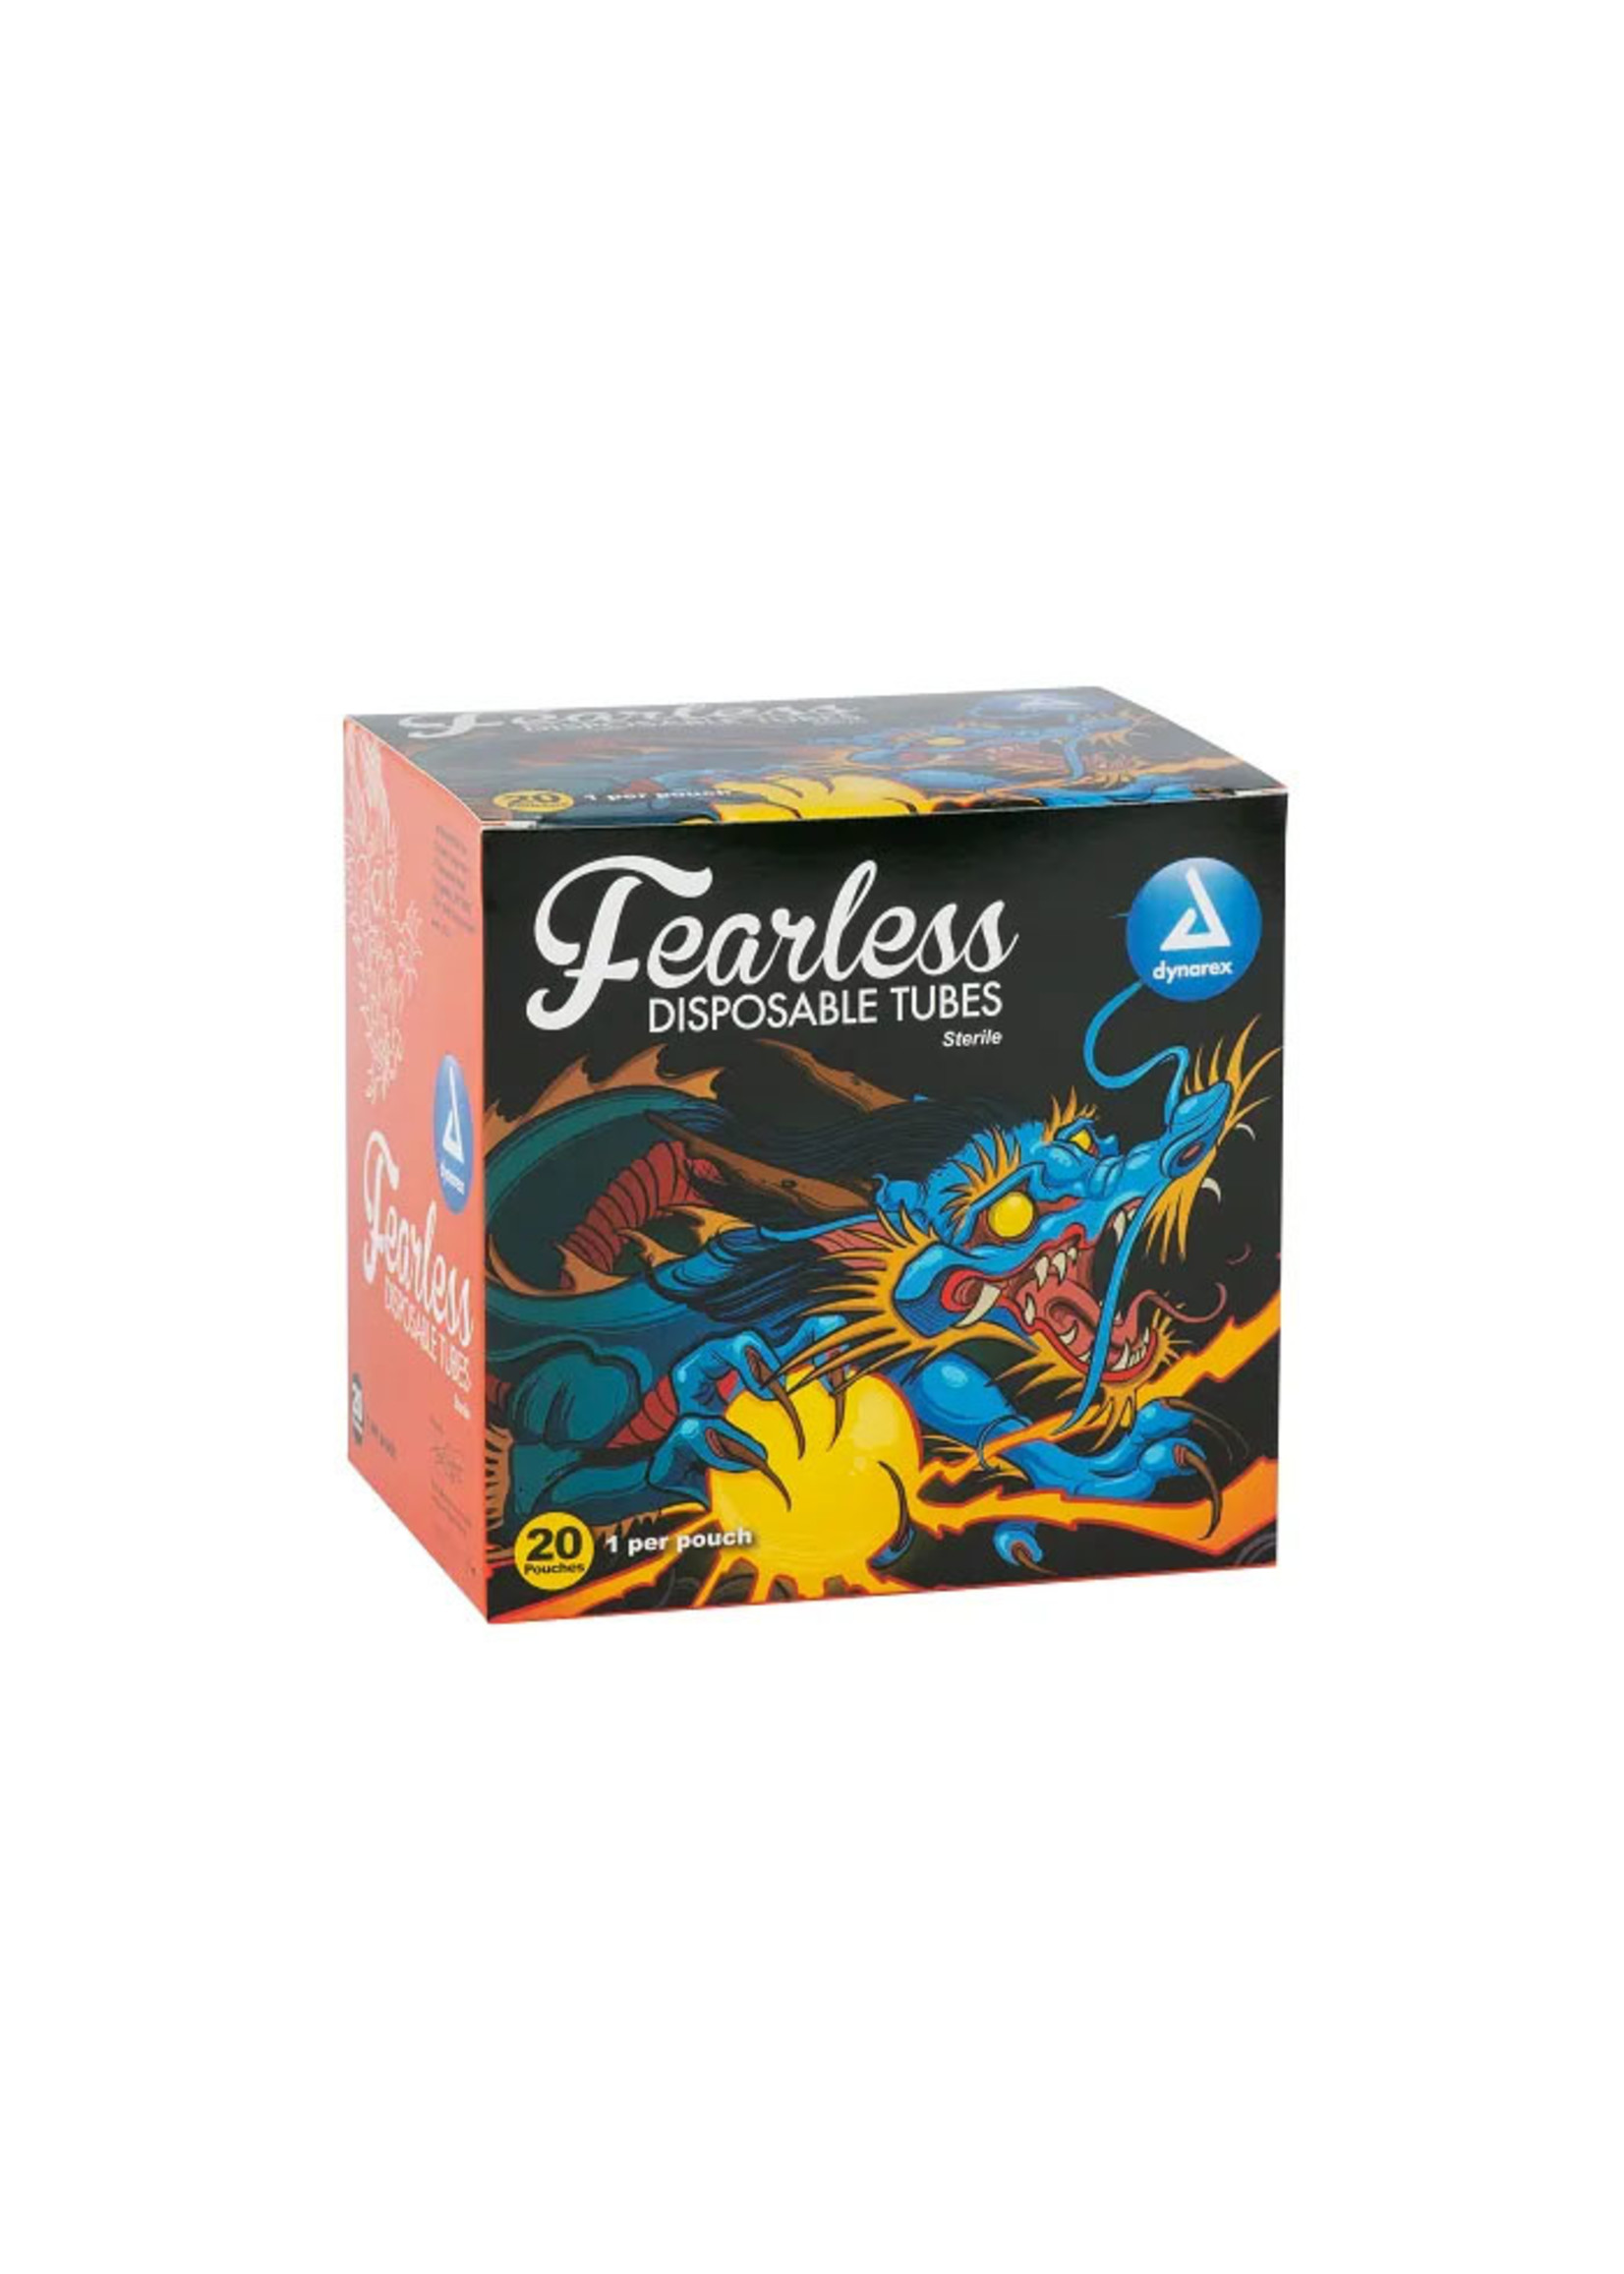 Dynarex Fearless Disposable Tubes 25mm (3R) Box of 20